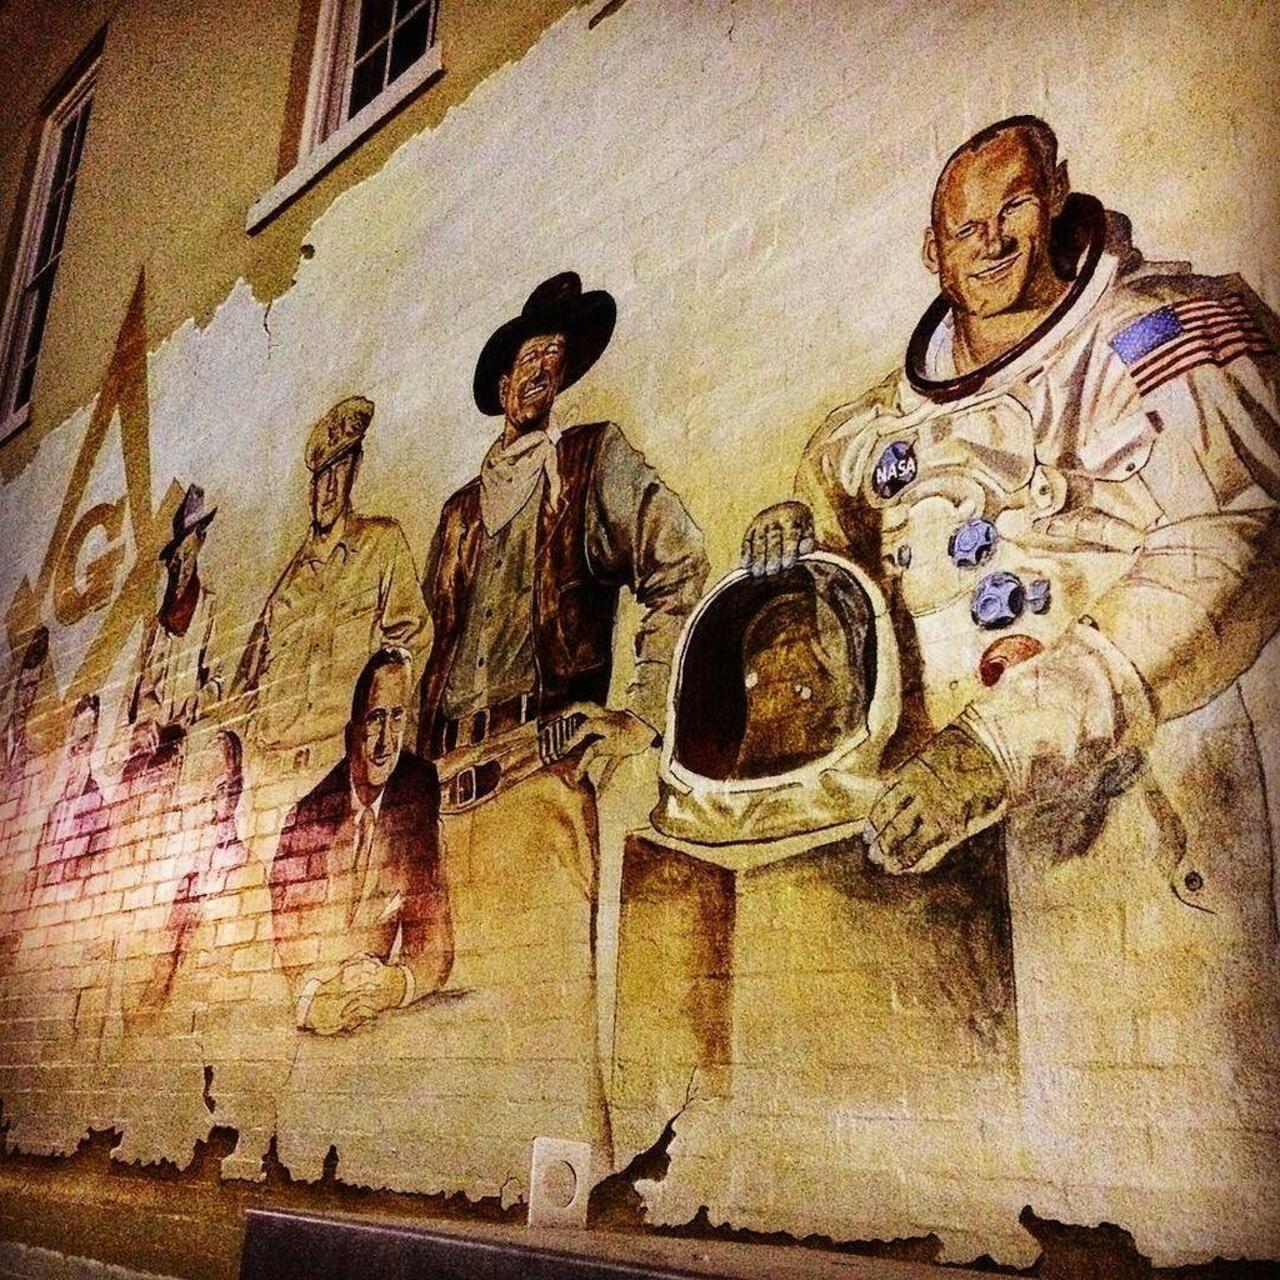 #armstrong #streetart #art #texas #grapevine #dallas #graffiti #downtown #wall #legacy #country #dfw #spring #wine … http://t.co/wMkT3zb64T